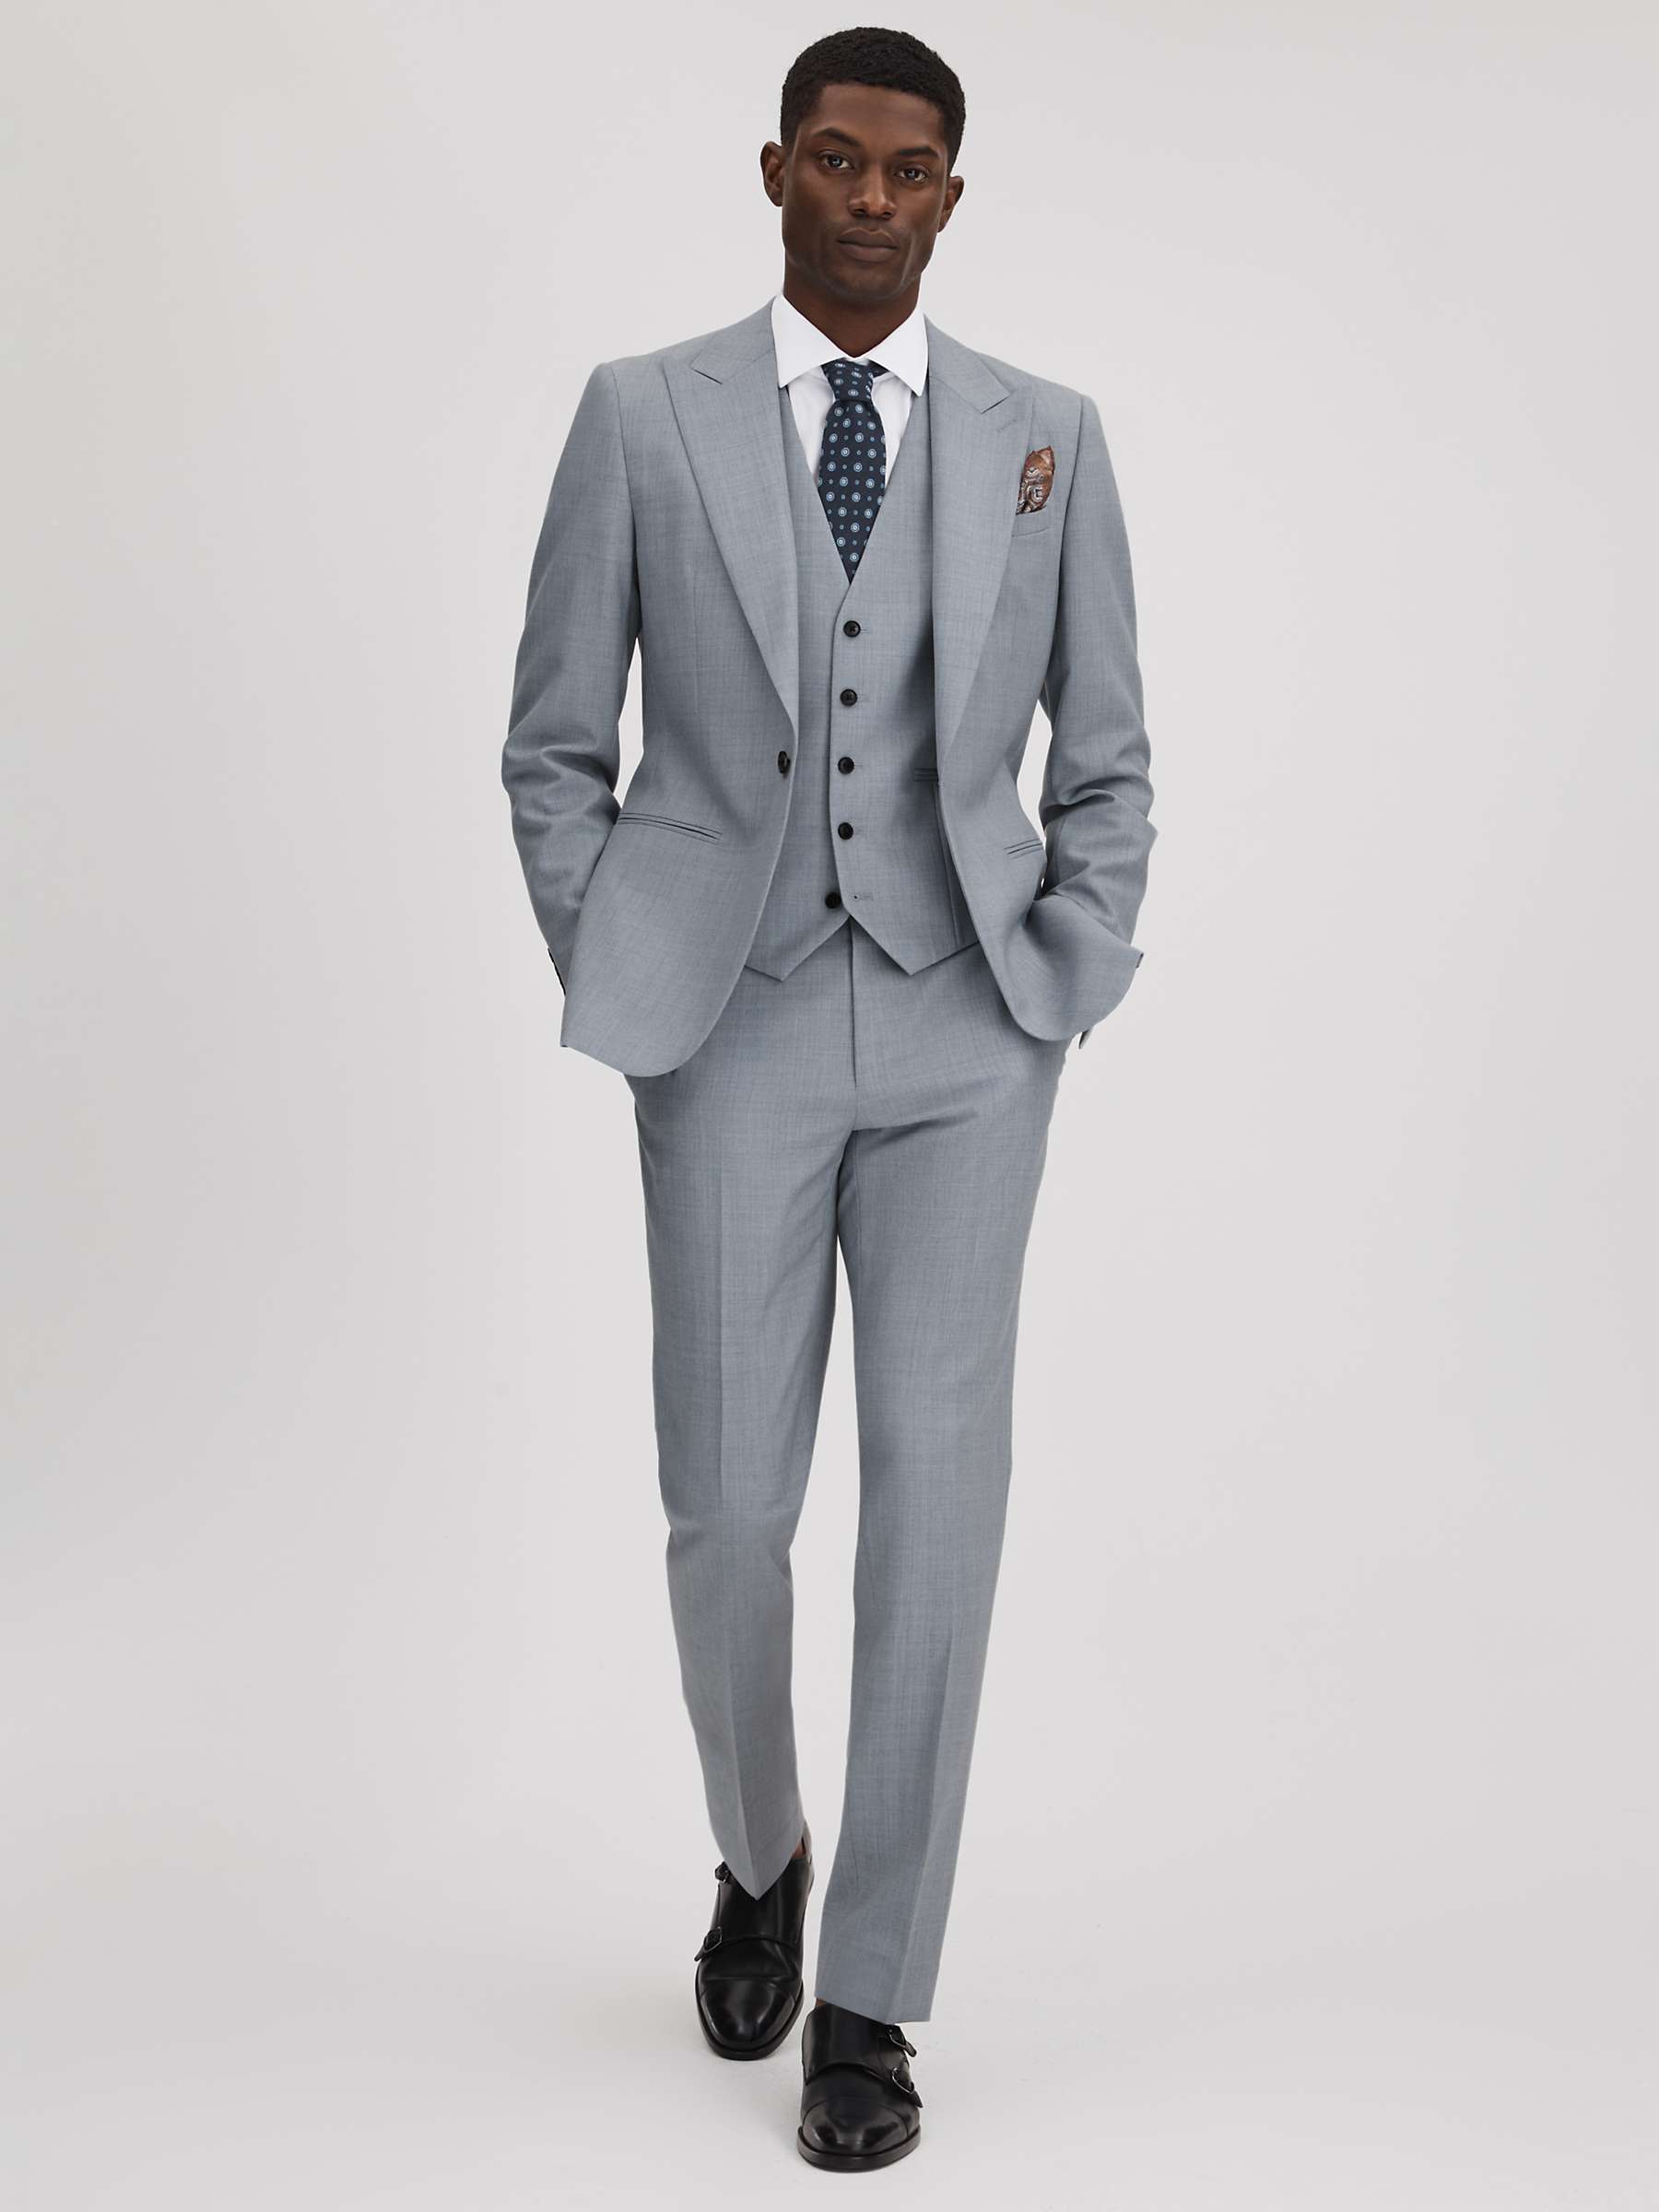 Buy Reiss Dandy Straight Fit Trousers, Soft Blue Online at johnlewis.com